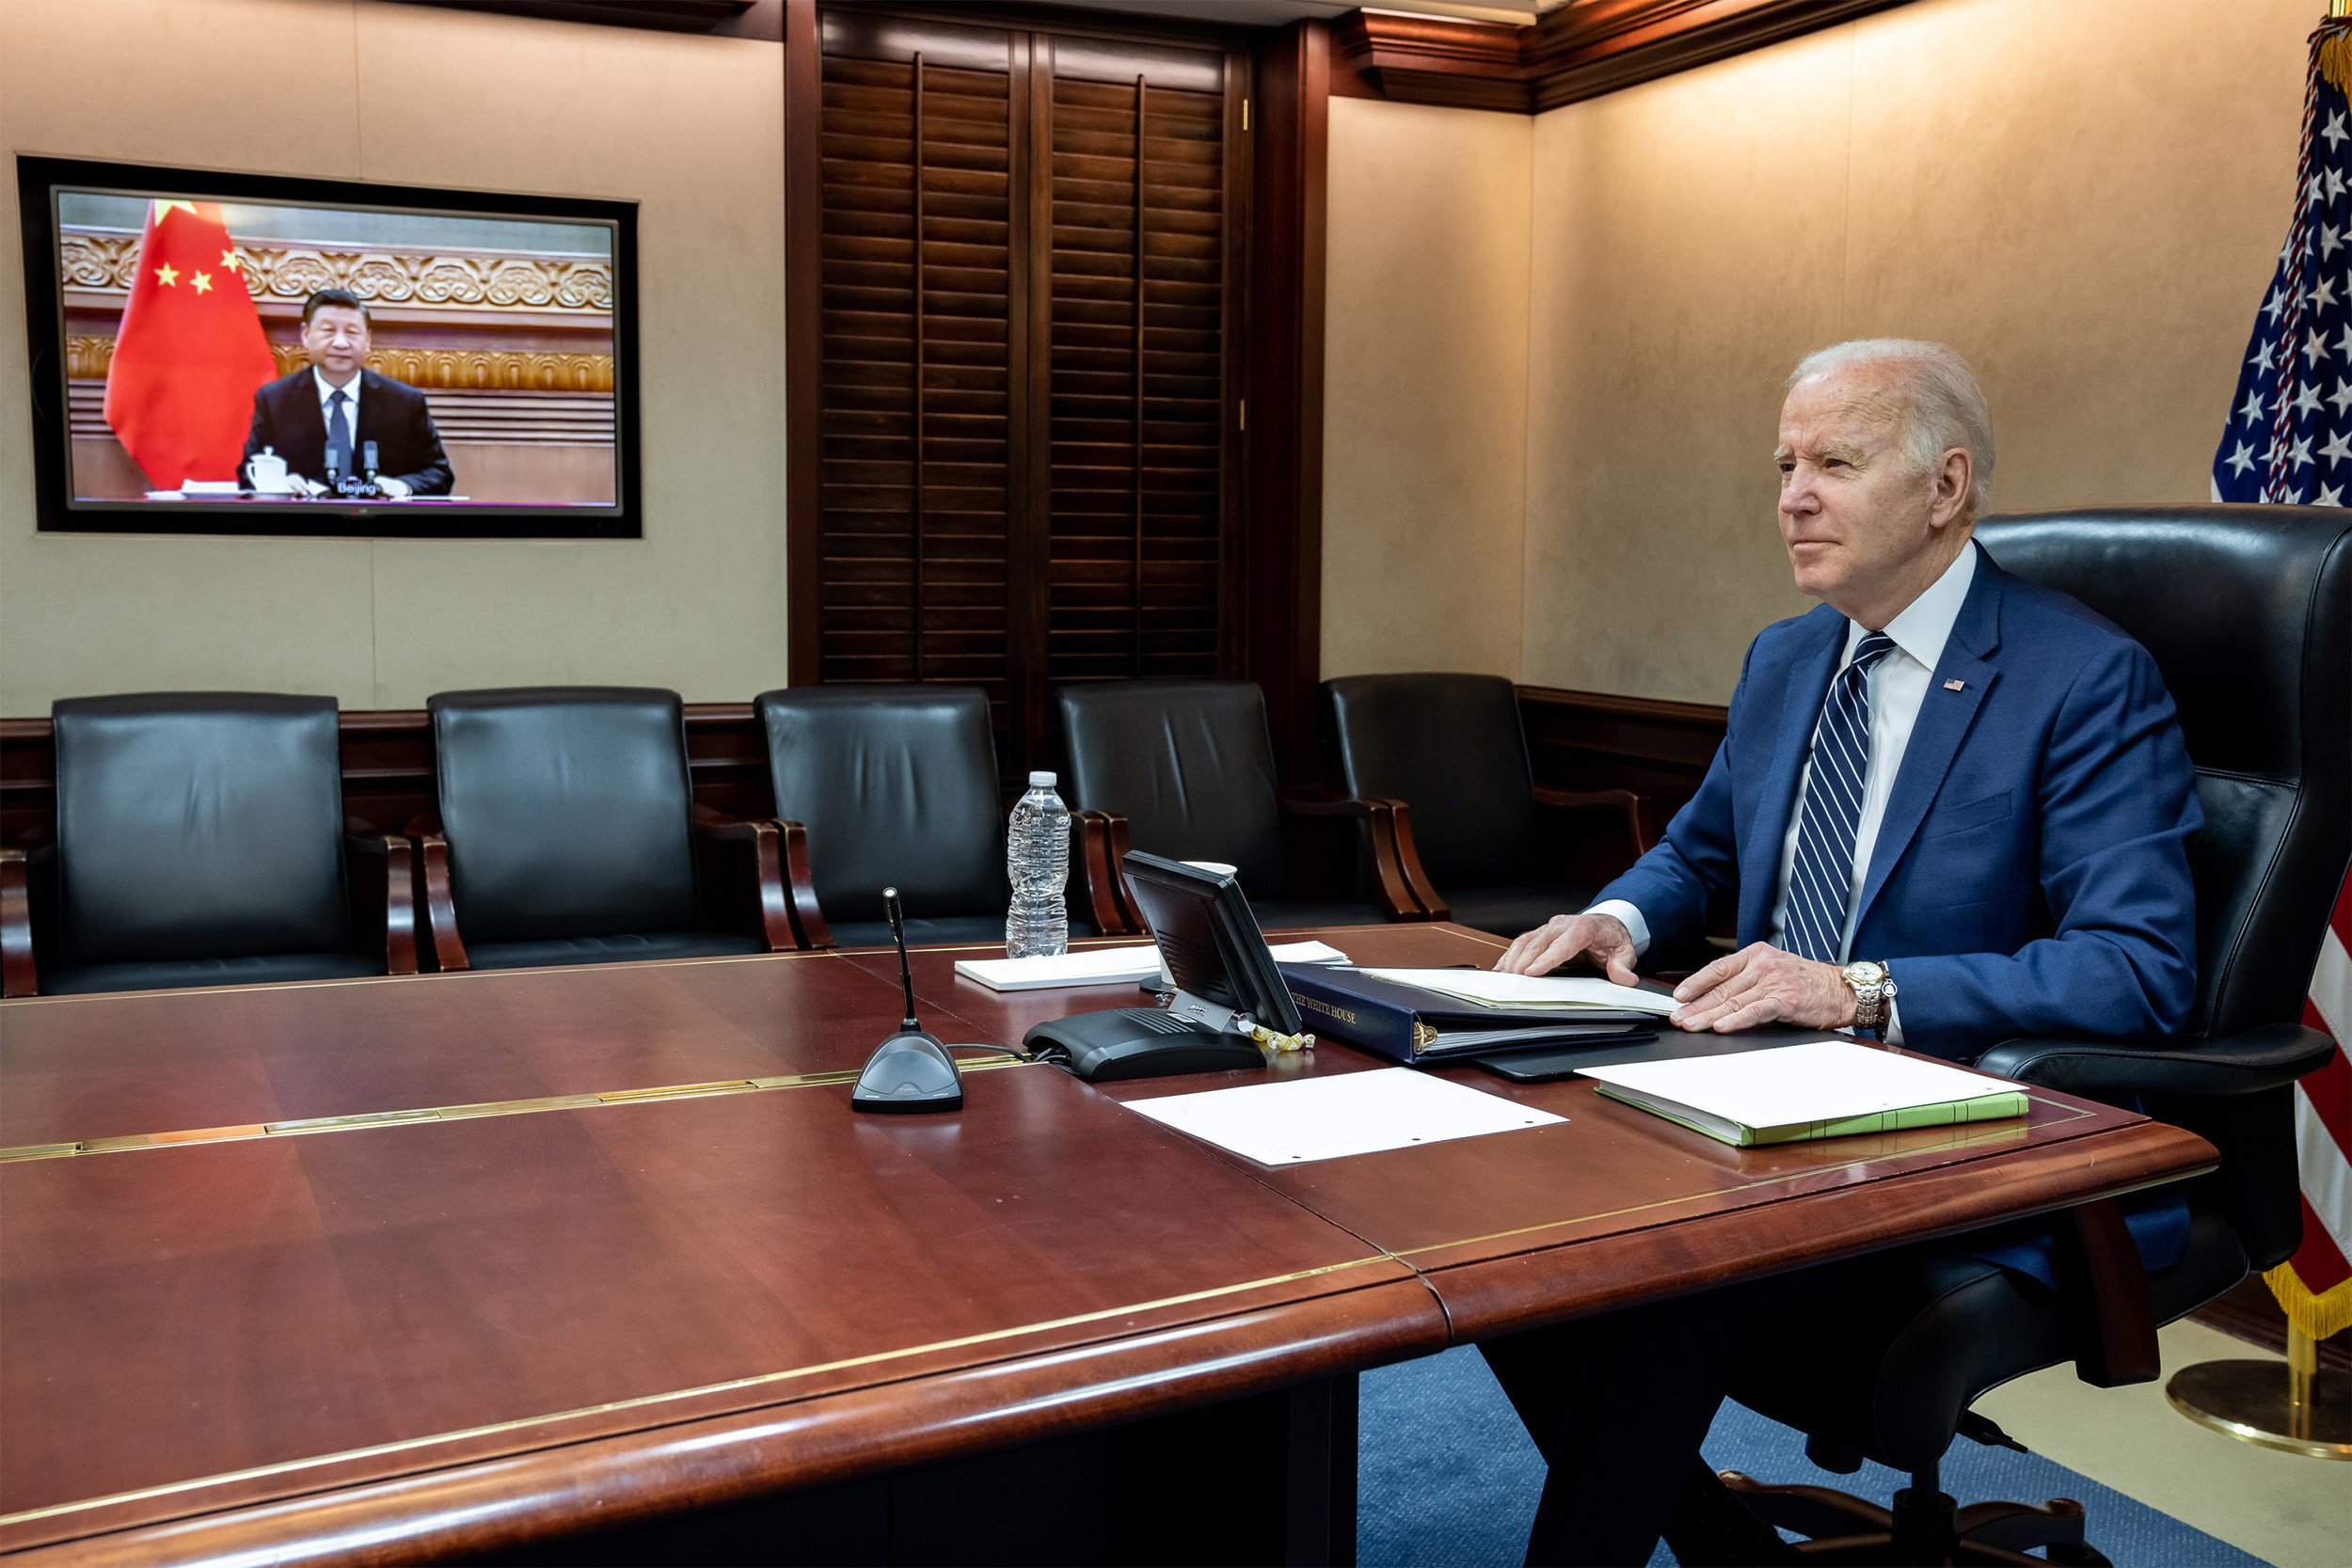 US President Joe Biden and Chinese President Xi Jinping hold a virtual meeting on March 17 to discuss the Ukraine crisis. Photo: Handout